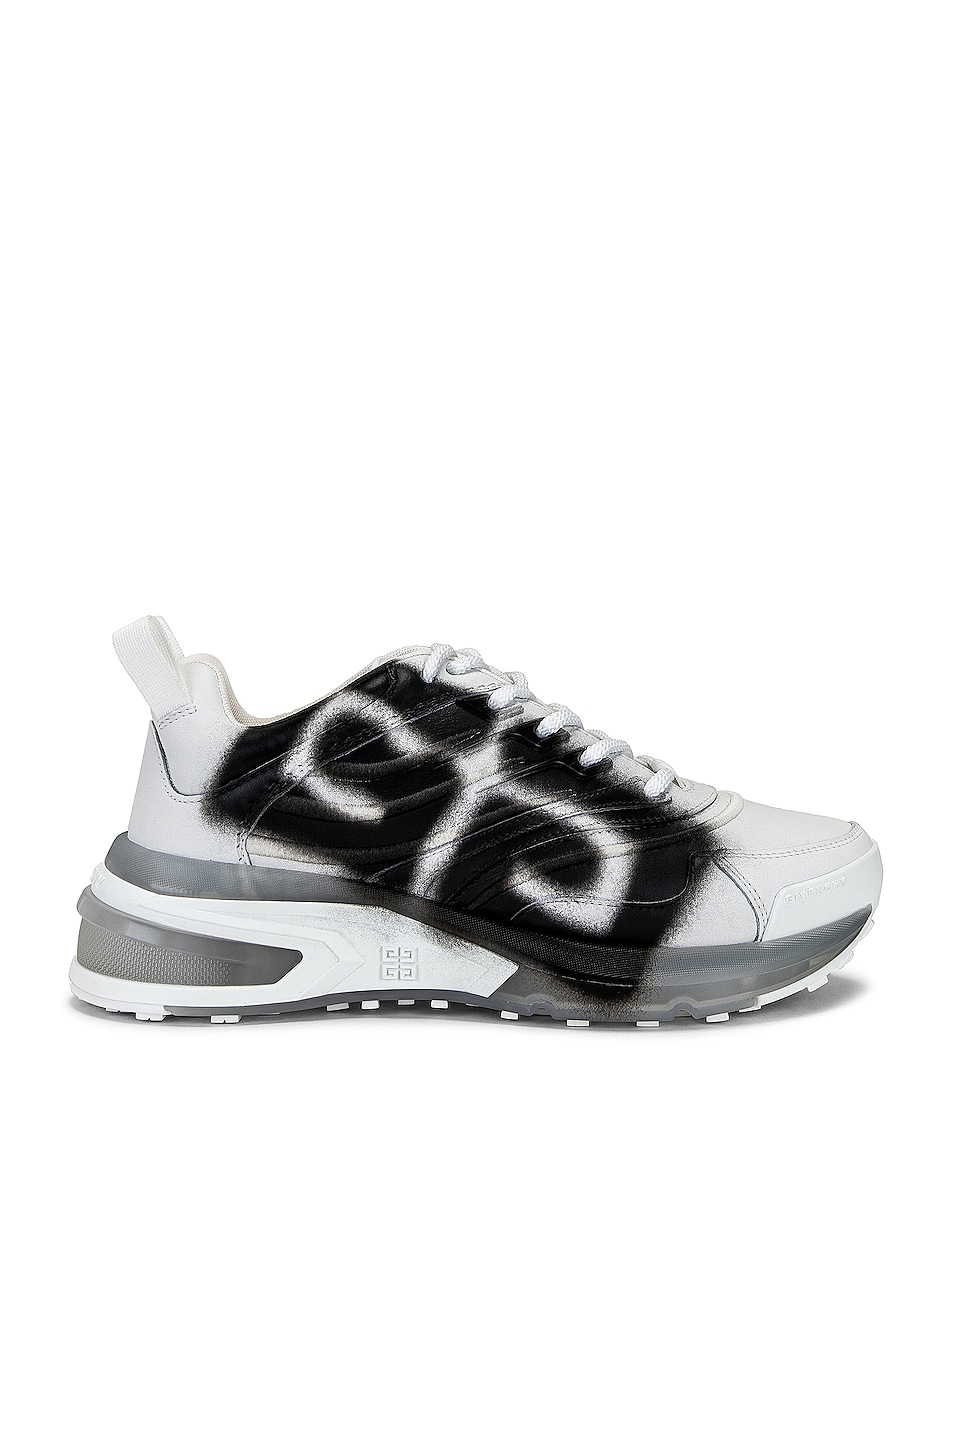 Image 1 of Givenchy GIV 1 Runner Sneakers in White & Black